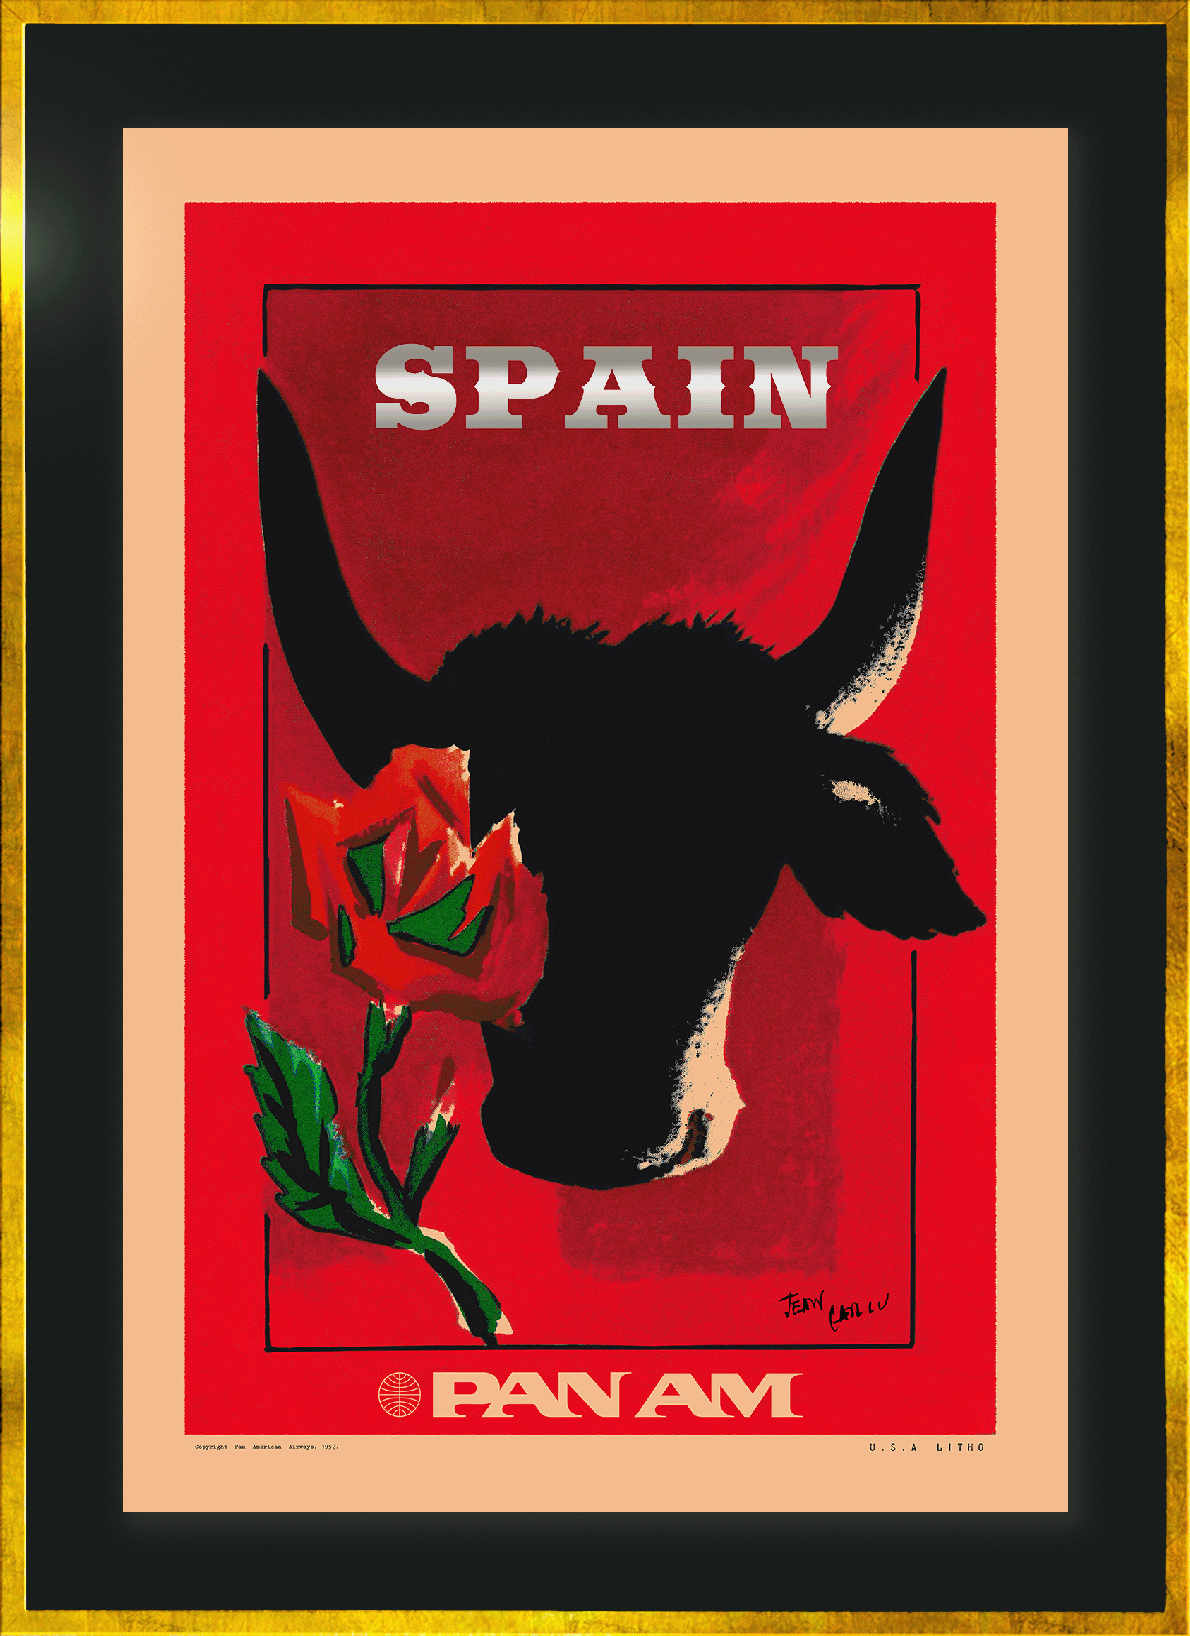 Spain, Pan Am, 1950s [Ode to the Toro] [Red]